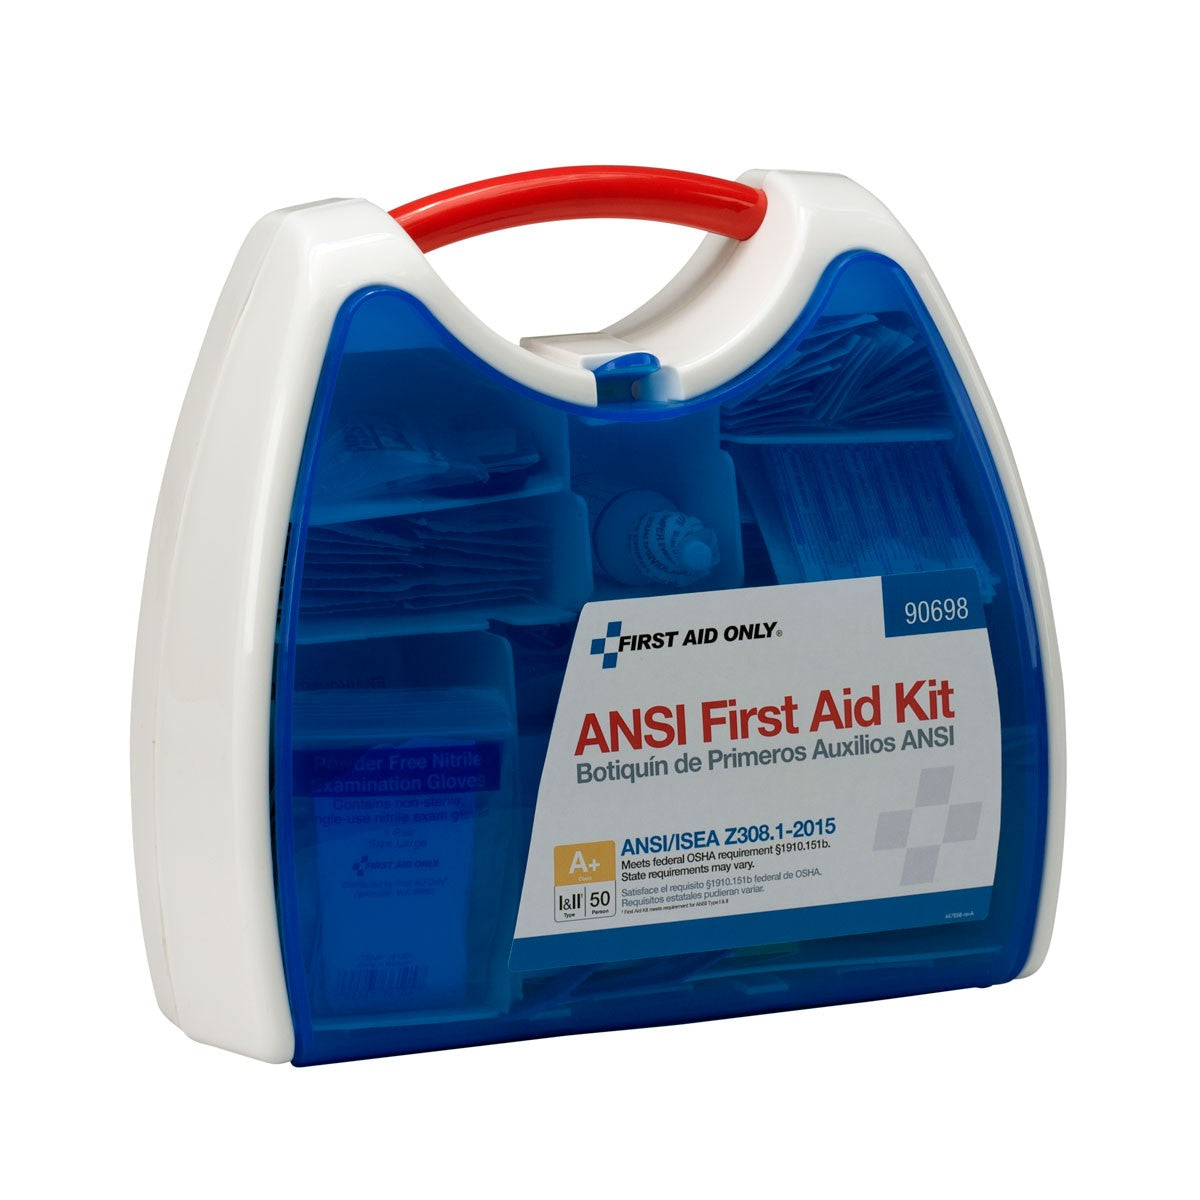 50 Person ReadyCare First Aid Kit, ANSI Compliant - W-90698